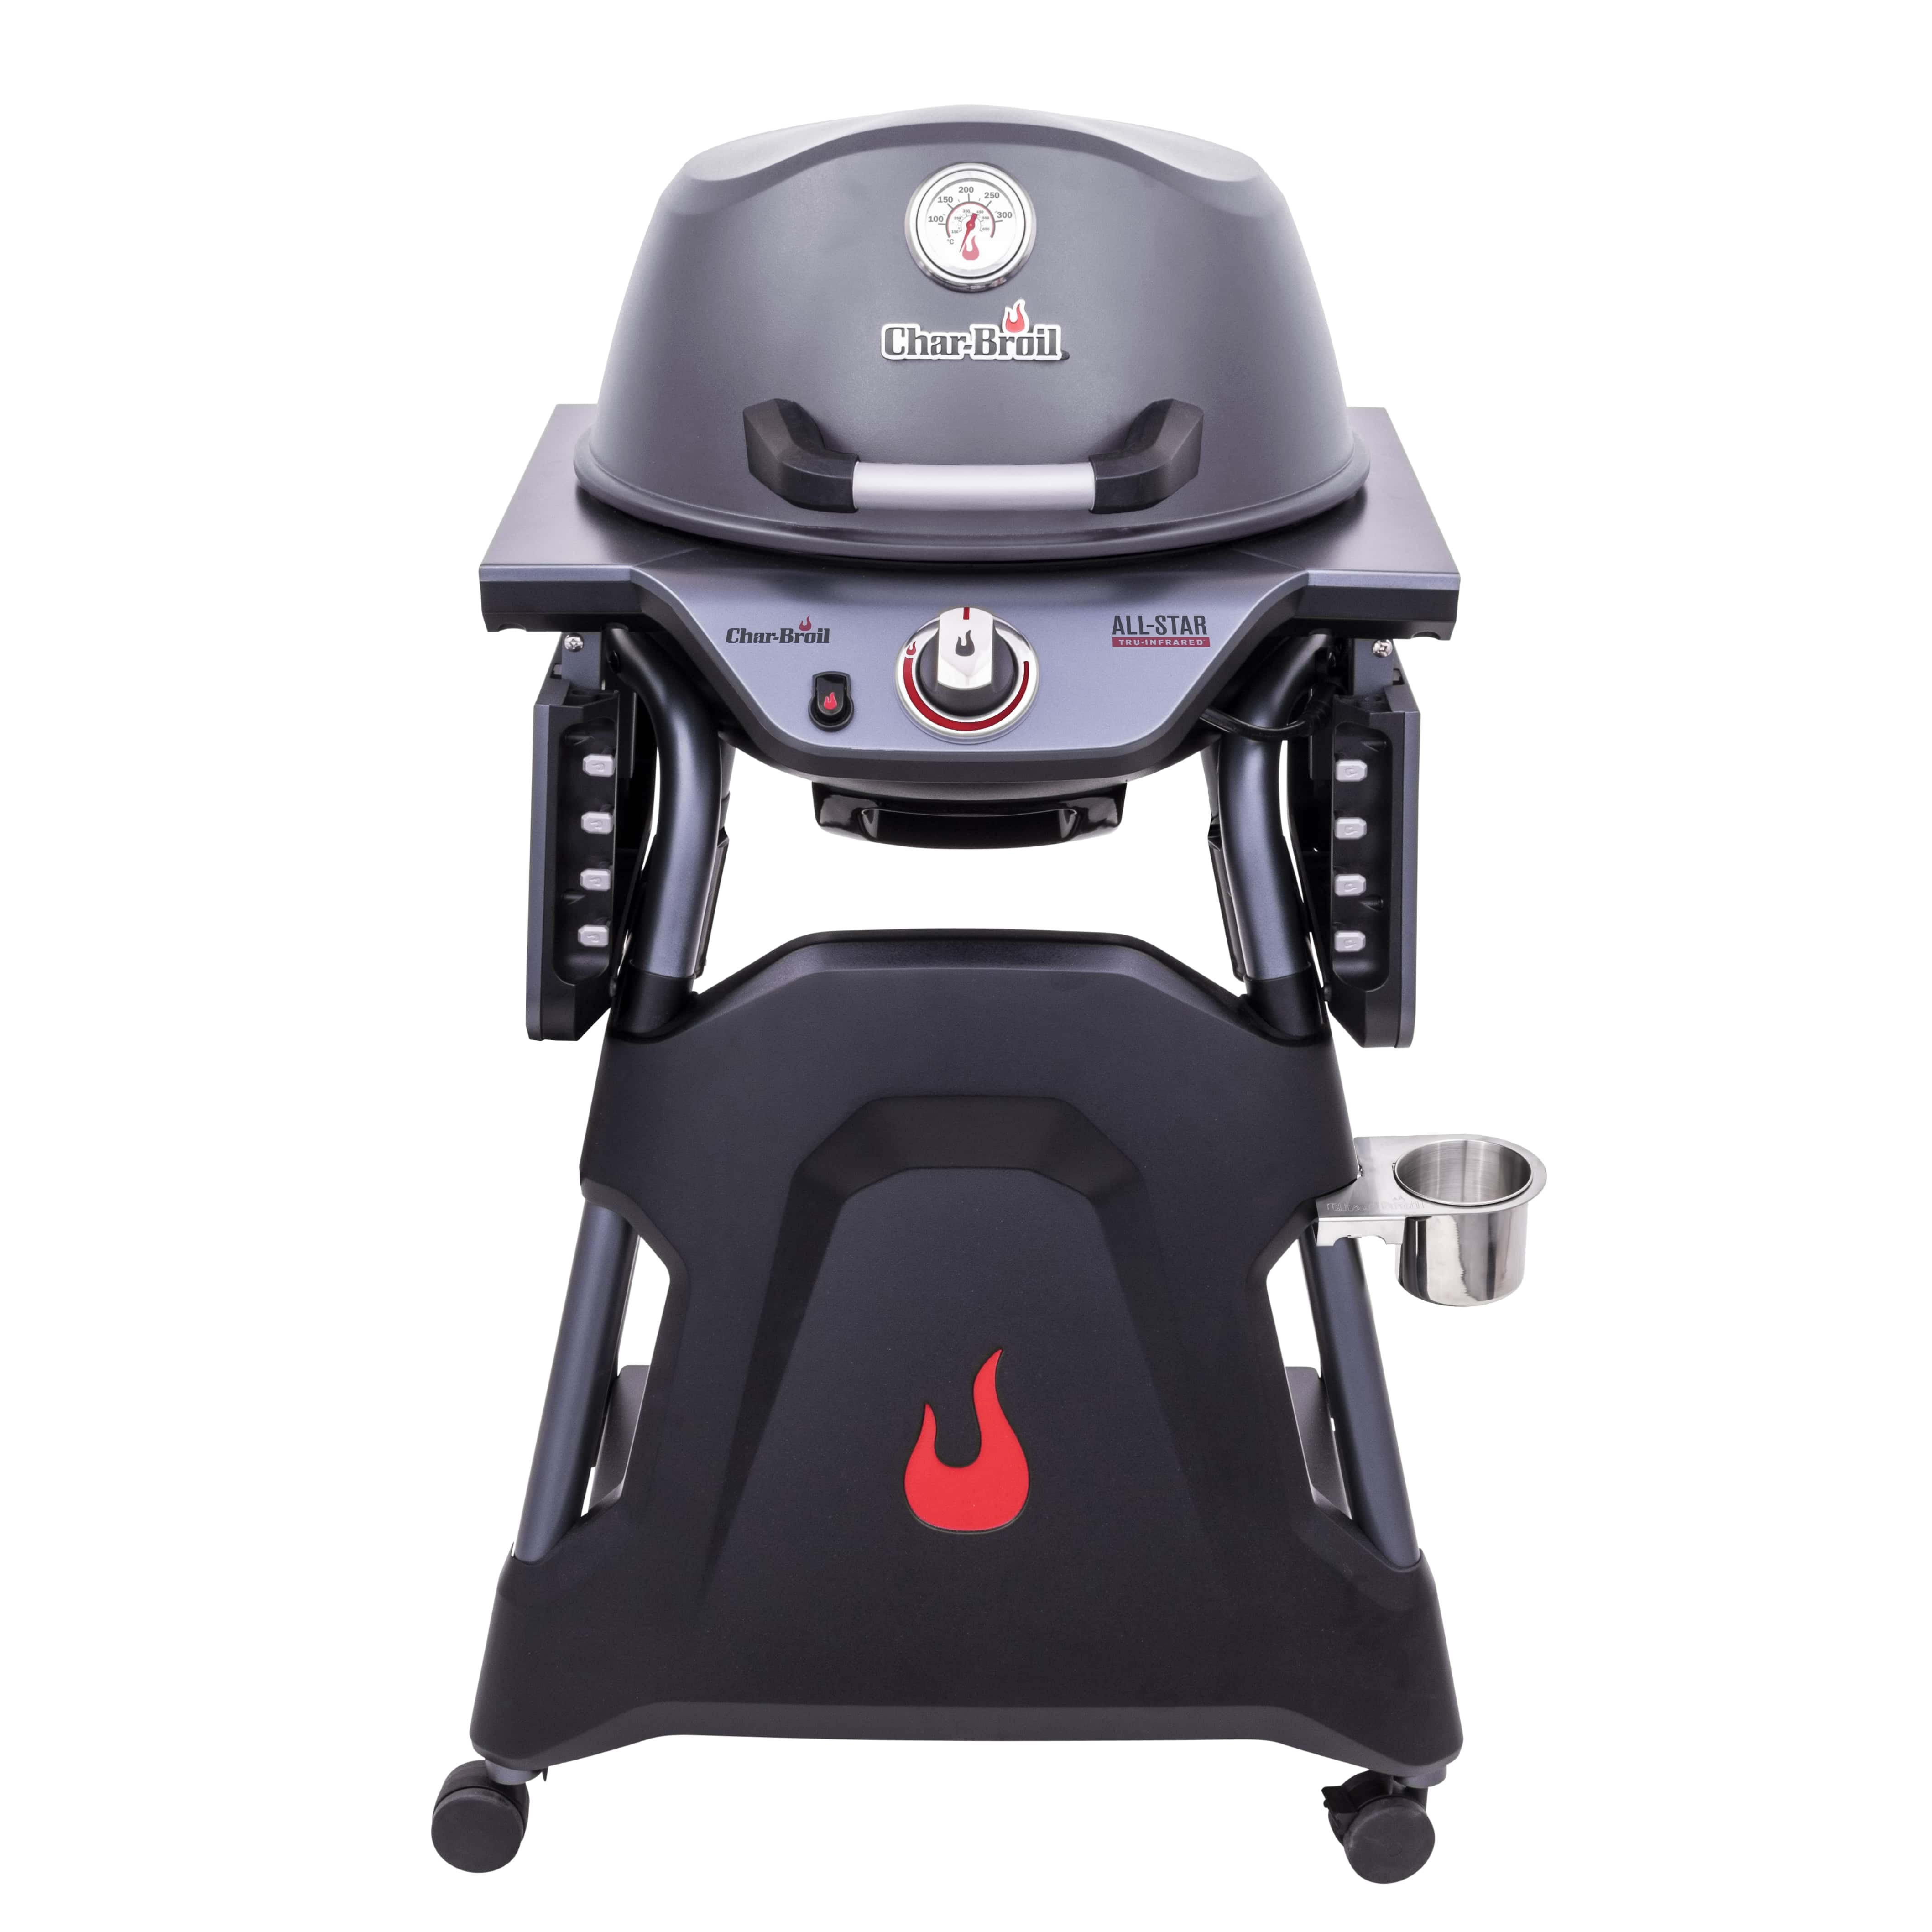 Char-Broil All Star 125 Gas Barbecue Grill